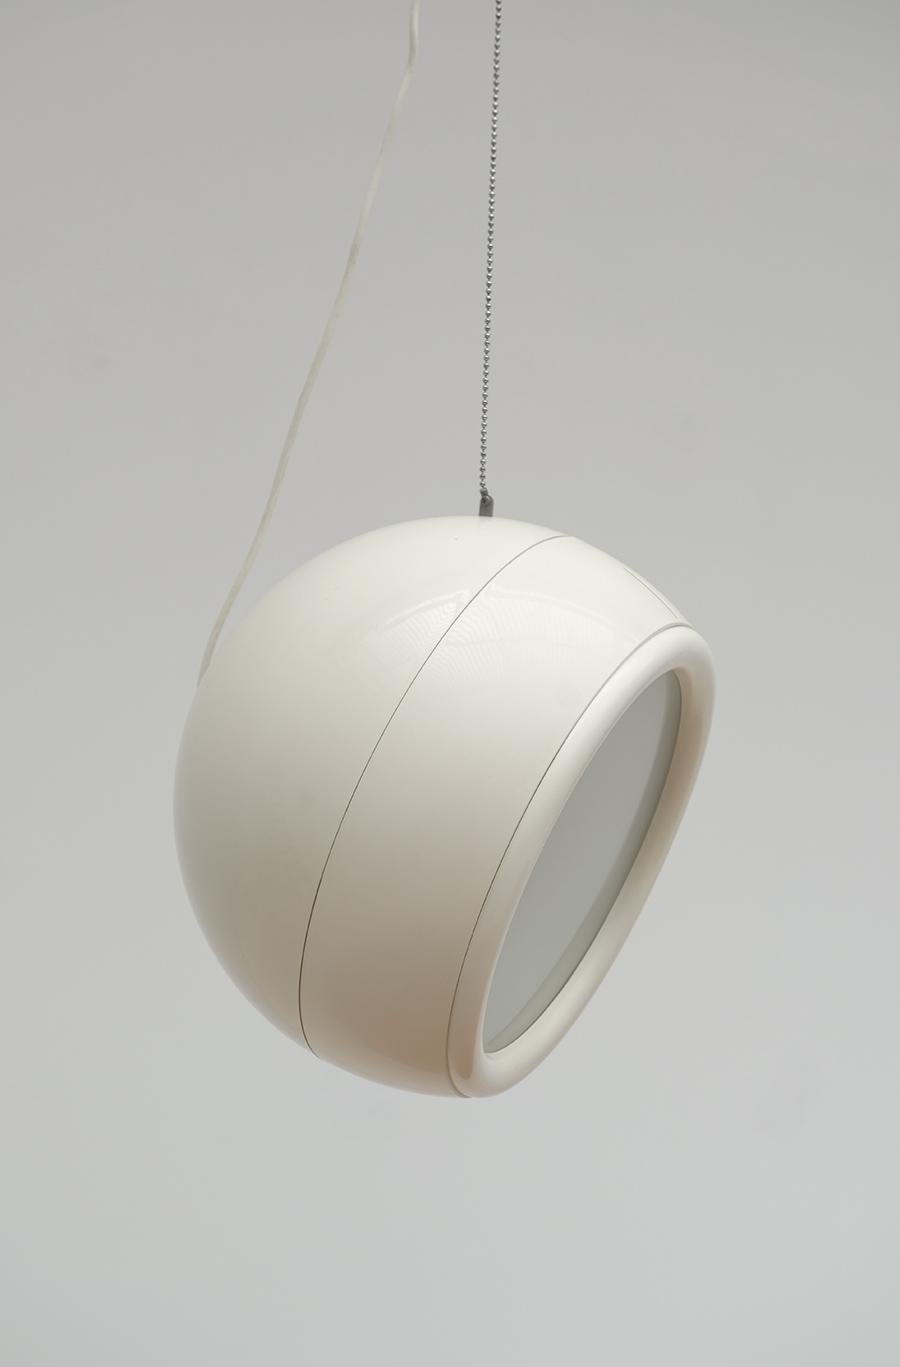 Mid-17th Century white modern Pallade Lamp by Studio Tetrarch for Artemide For Sale